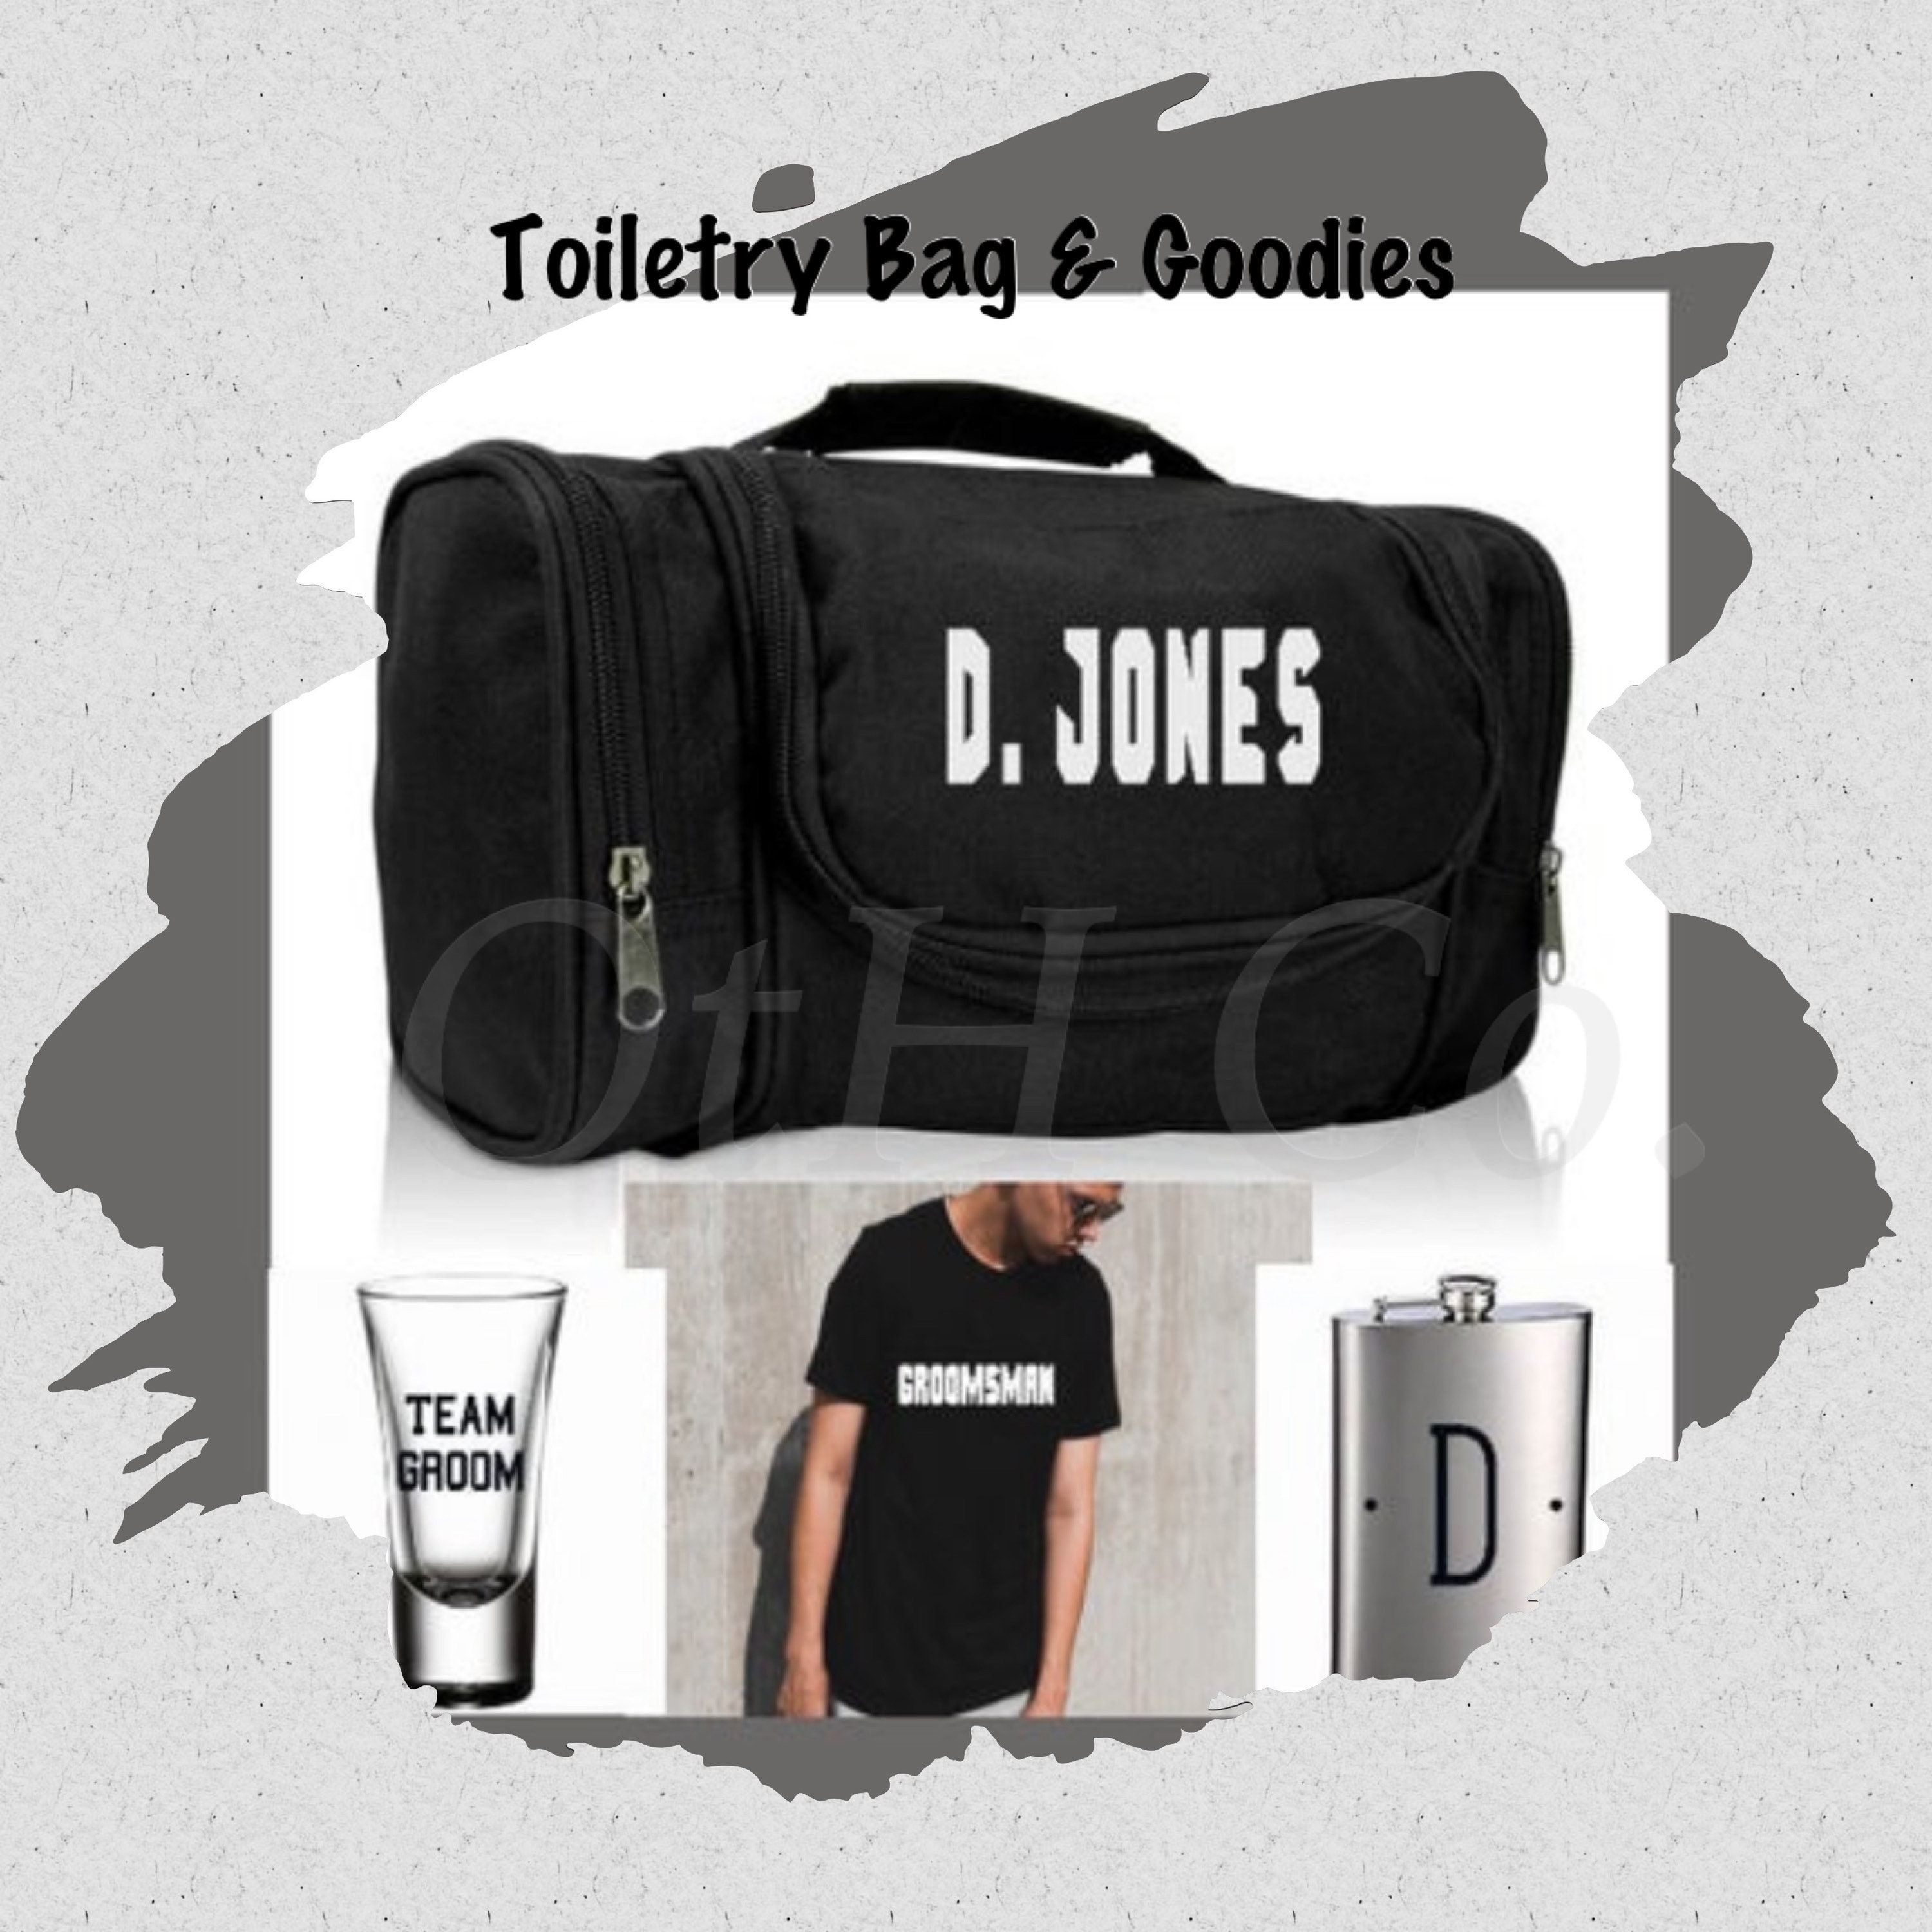 Groomsman Proposal Gift/Toiletry Bag/Mens Gift Ideas/Best man Gifts/ Groomsman travel bags/Custom Wedding party gifts/Bachelor Party gifts